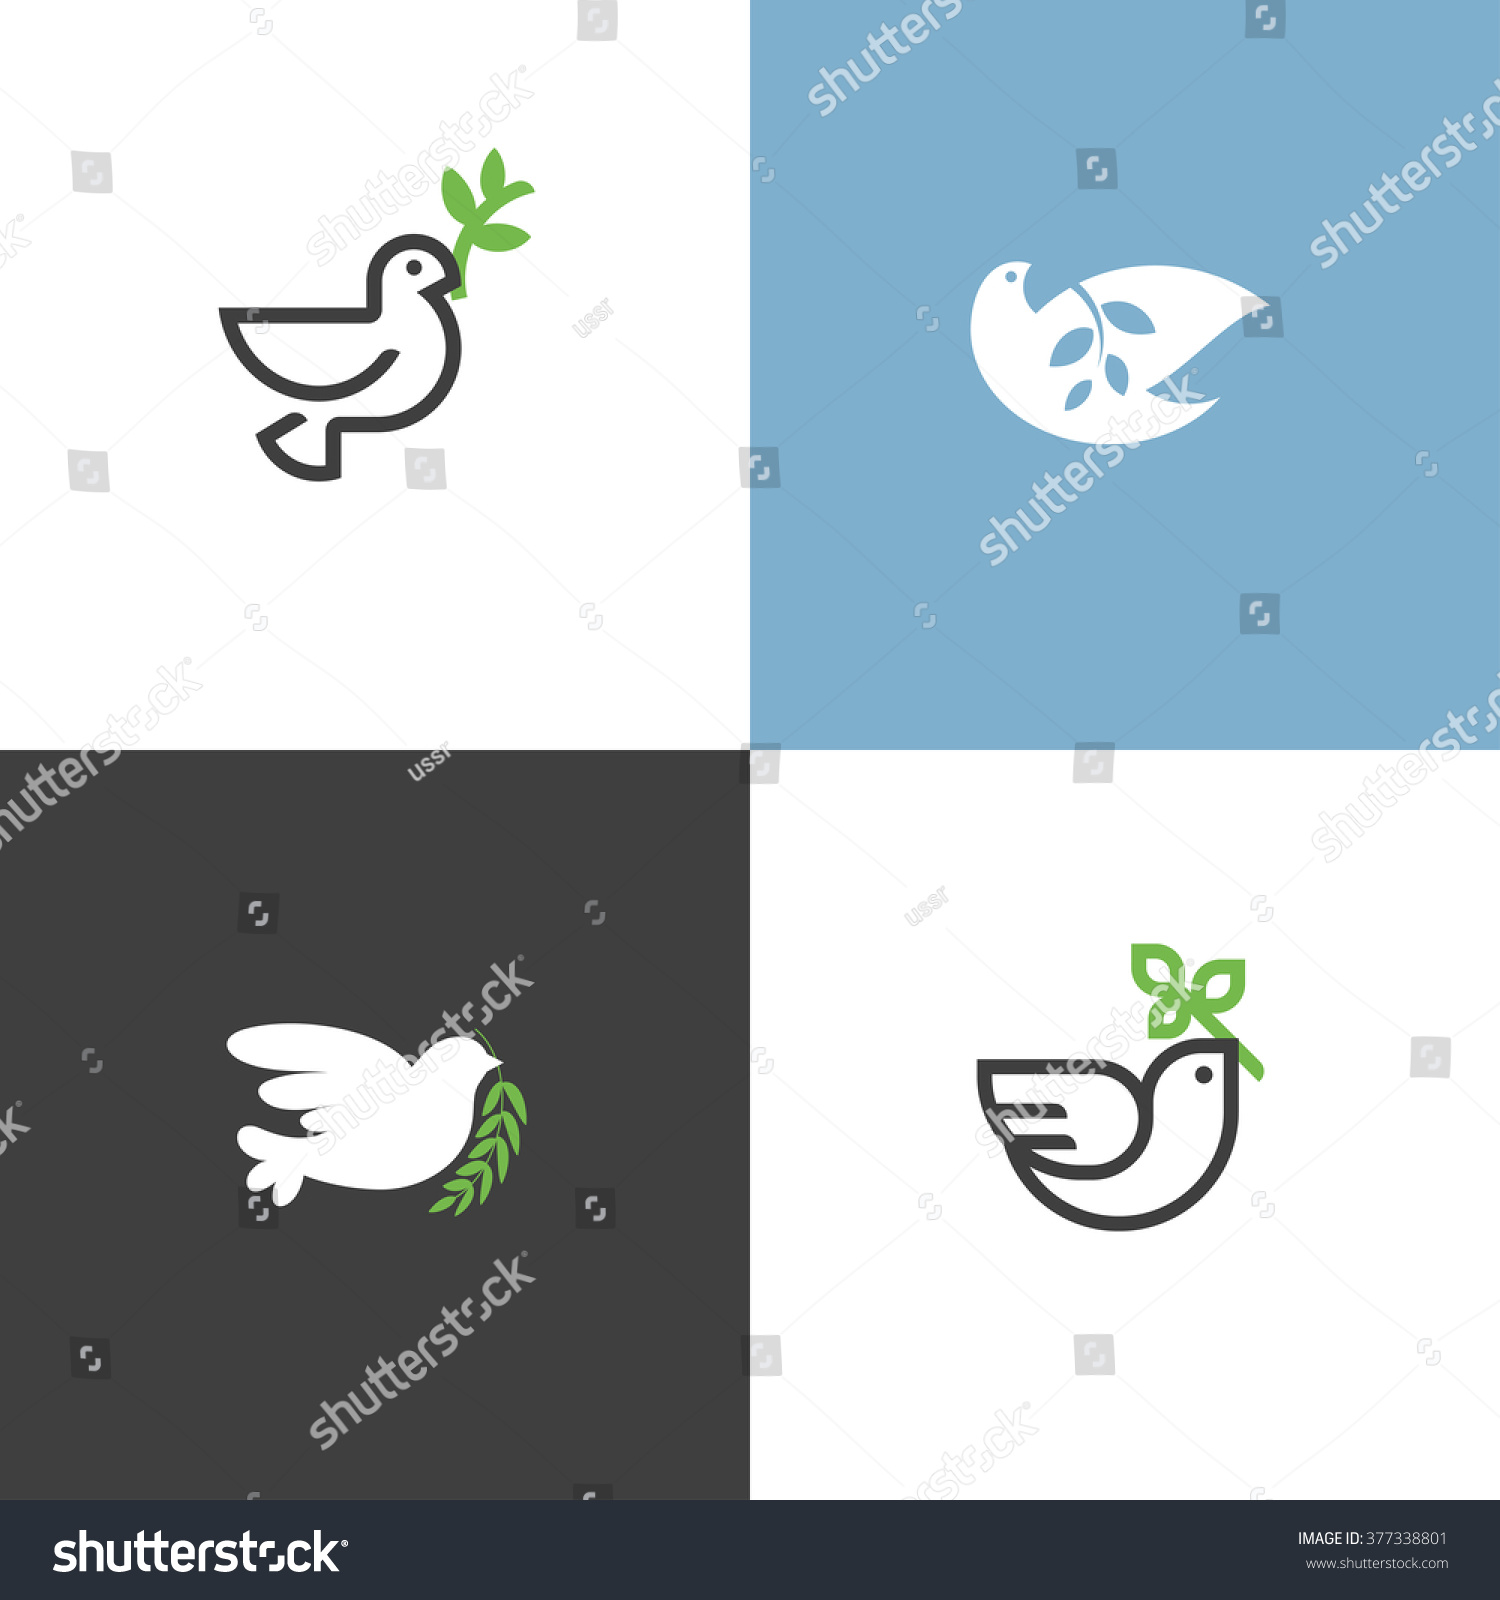 Peace dove with green branch. Flat line design style vector illustrations set of icons and logos #377338801